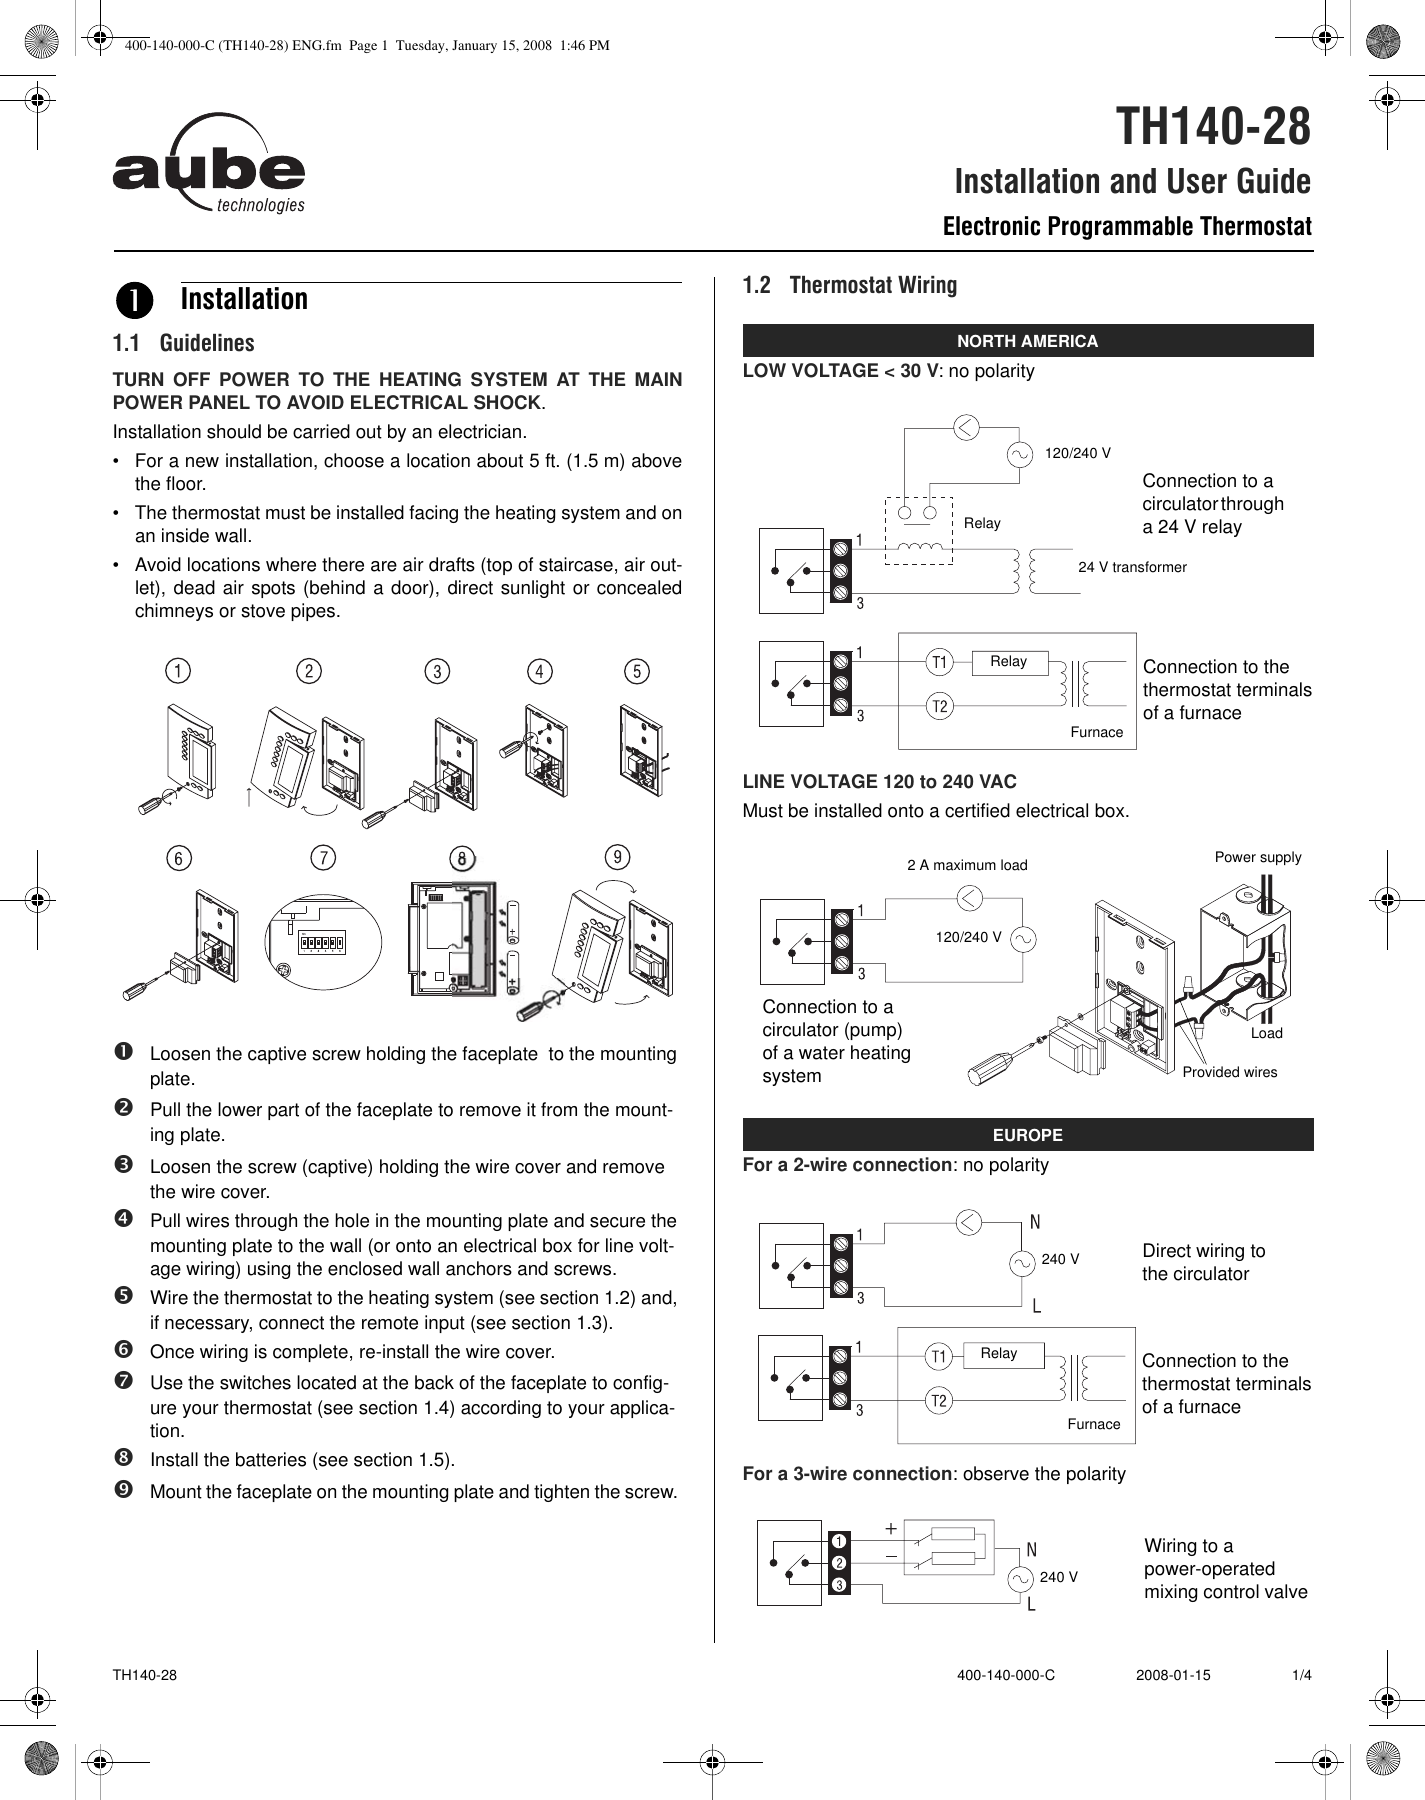 Page 1 of 4 - Aube-Technologies Aube-Technologies-Th140-28-Users-Manual- 400-140-000-C (TH140-28) ENG  Aube-technologies-th140-28-users-manual